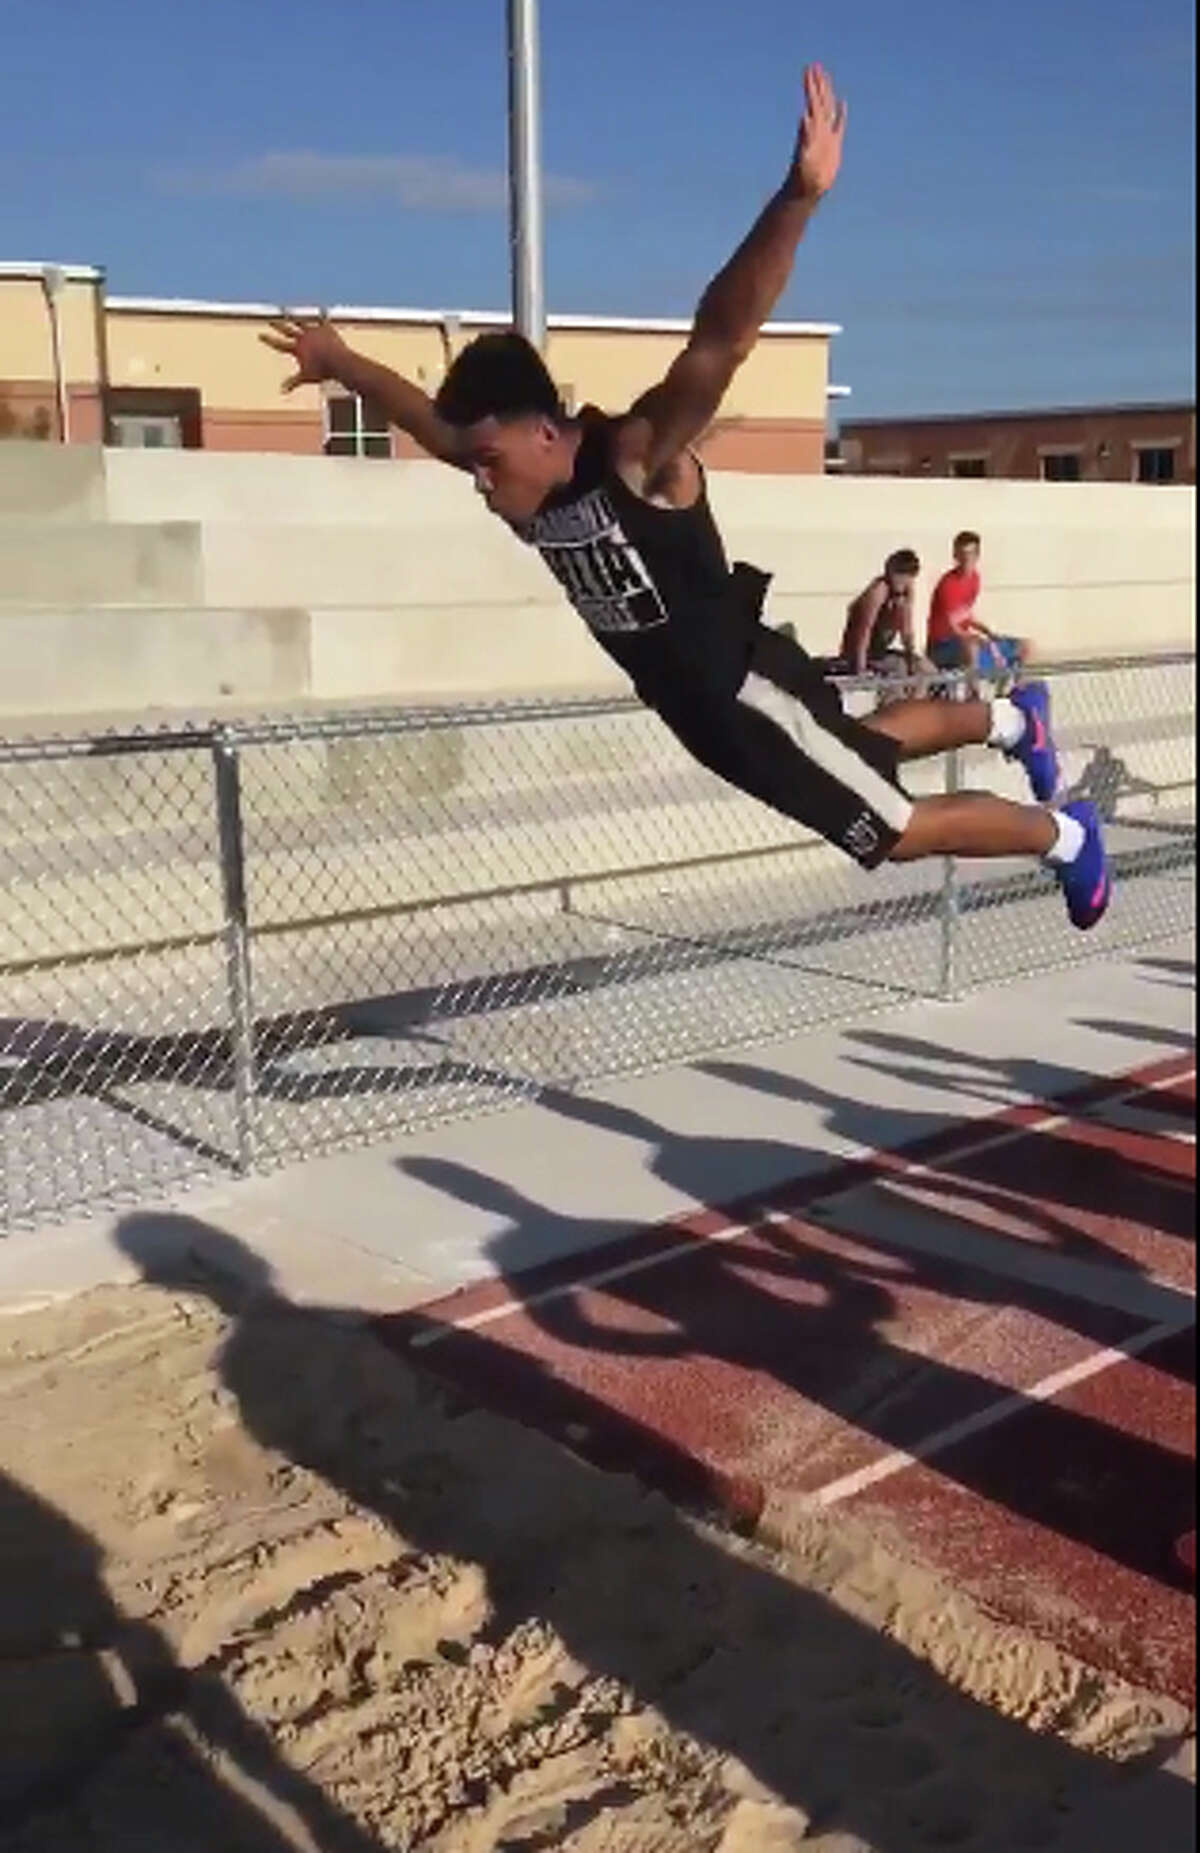 Video of Steele sophomore flipping over a sand pit goes viral